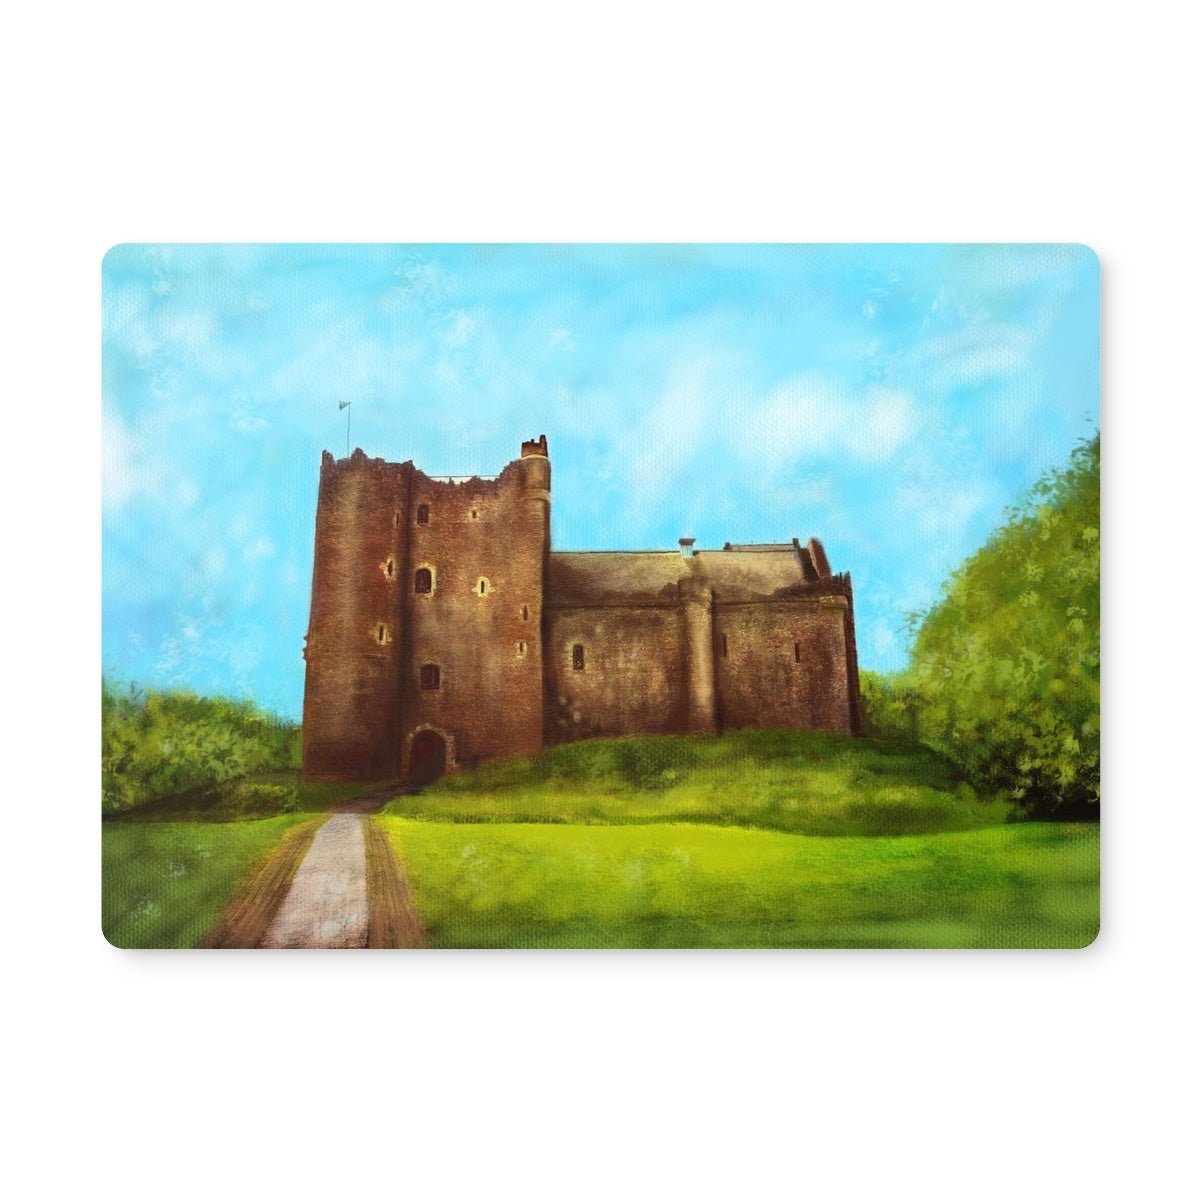 Doune Castle Art Gifts Placemat-Placemats-Scottish Castles Art Gallery-4 Placemats-Paintings, Prints, Homeware, Art Gifts From Scotland By Scottish Artist Kevin Hunter